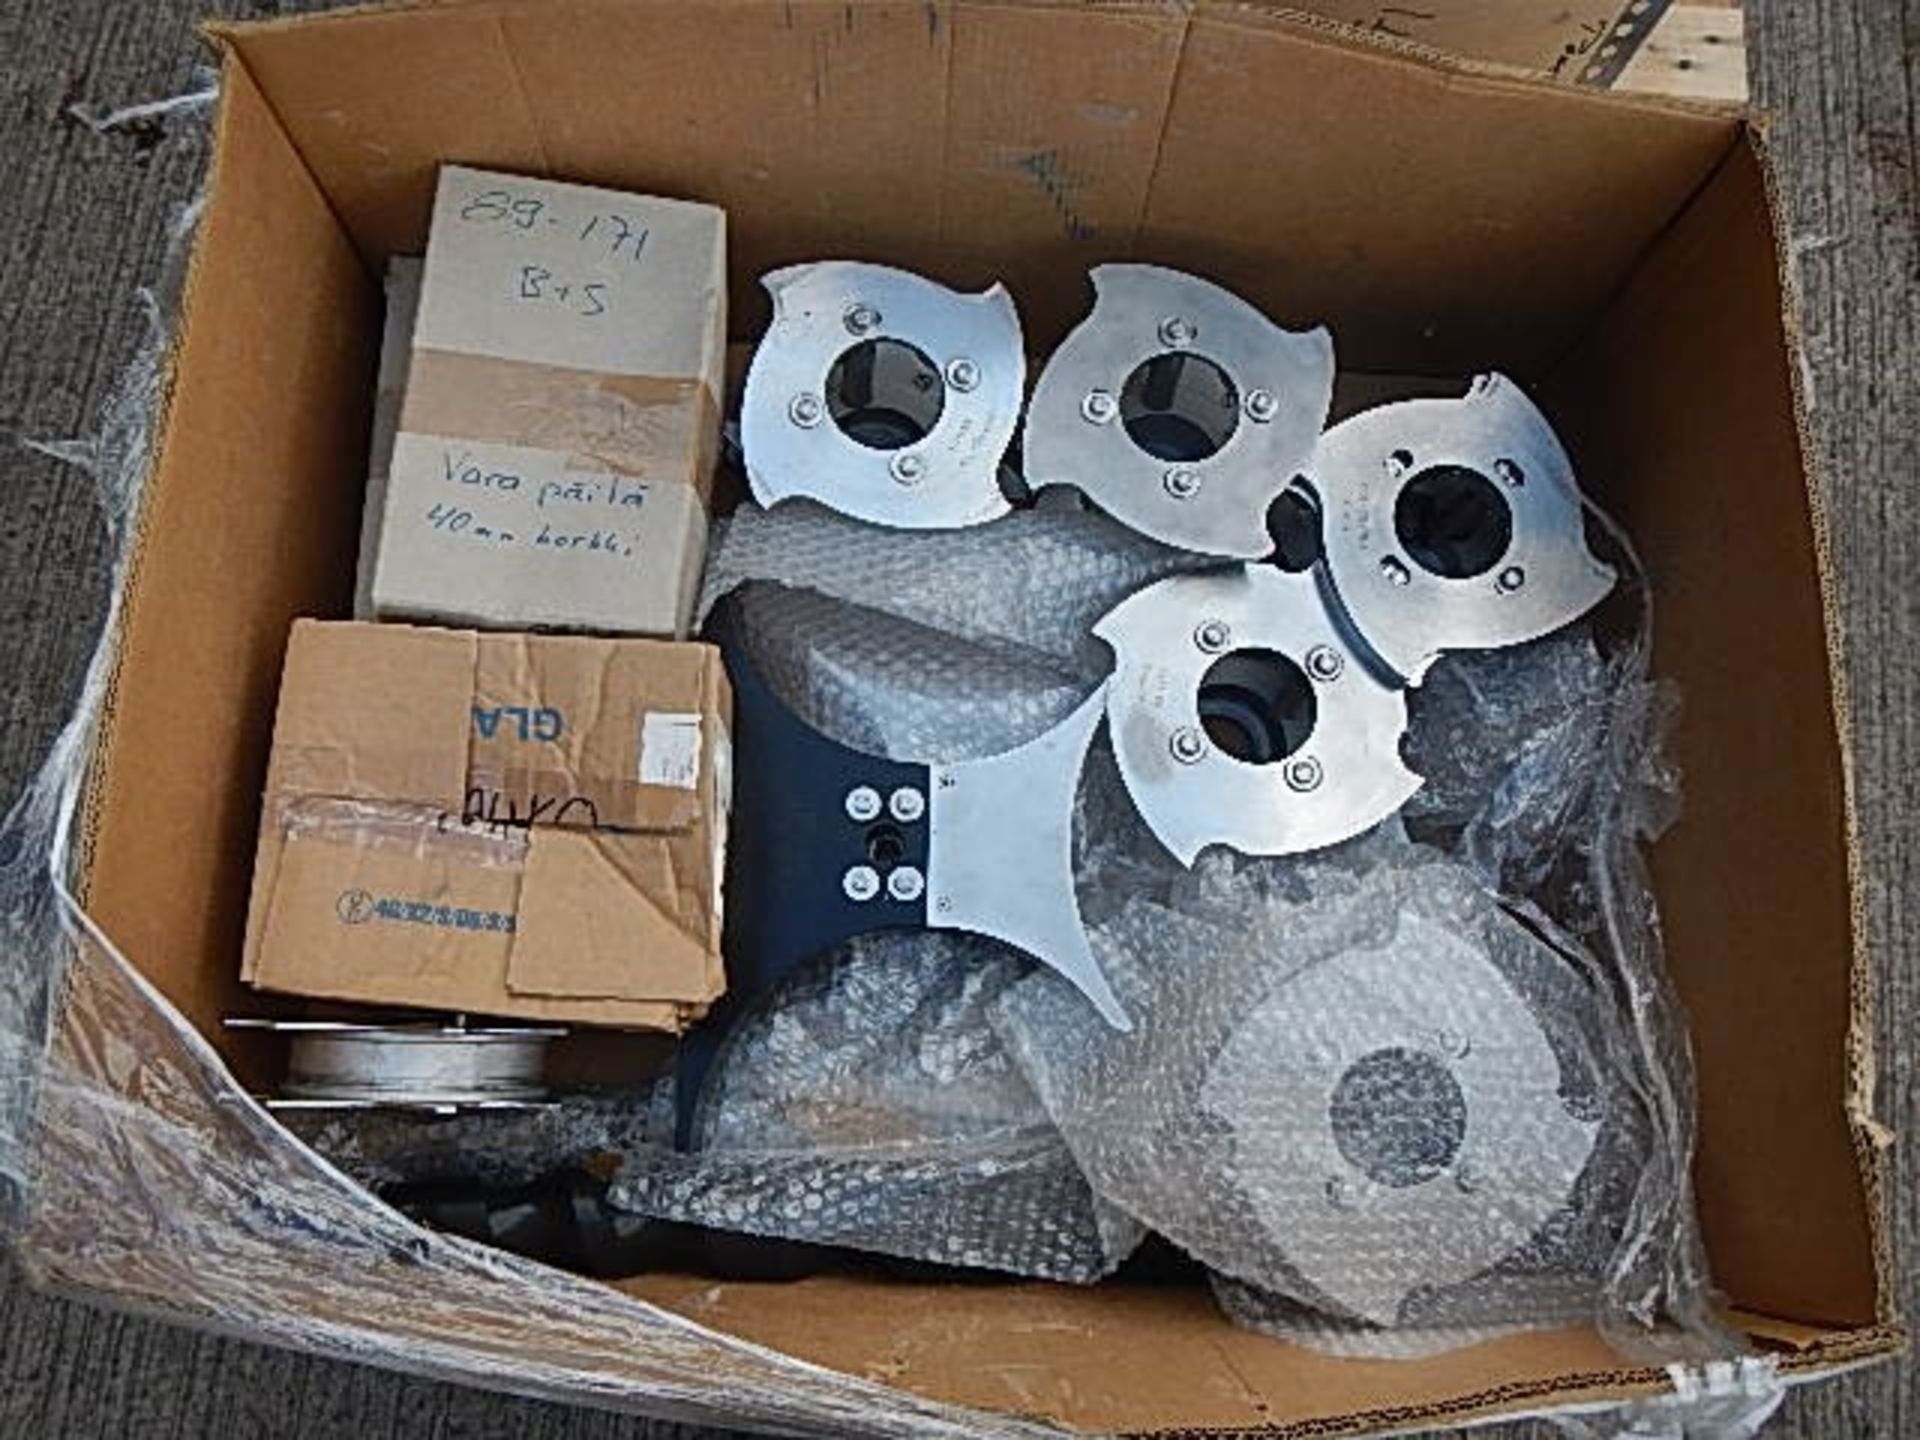 Bausch & Stroebel RVS 8000 automatic rotary 8 head - Image 18 of 20